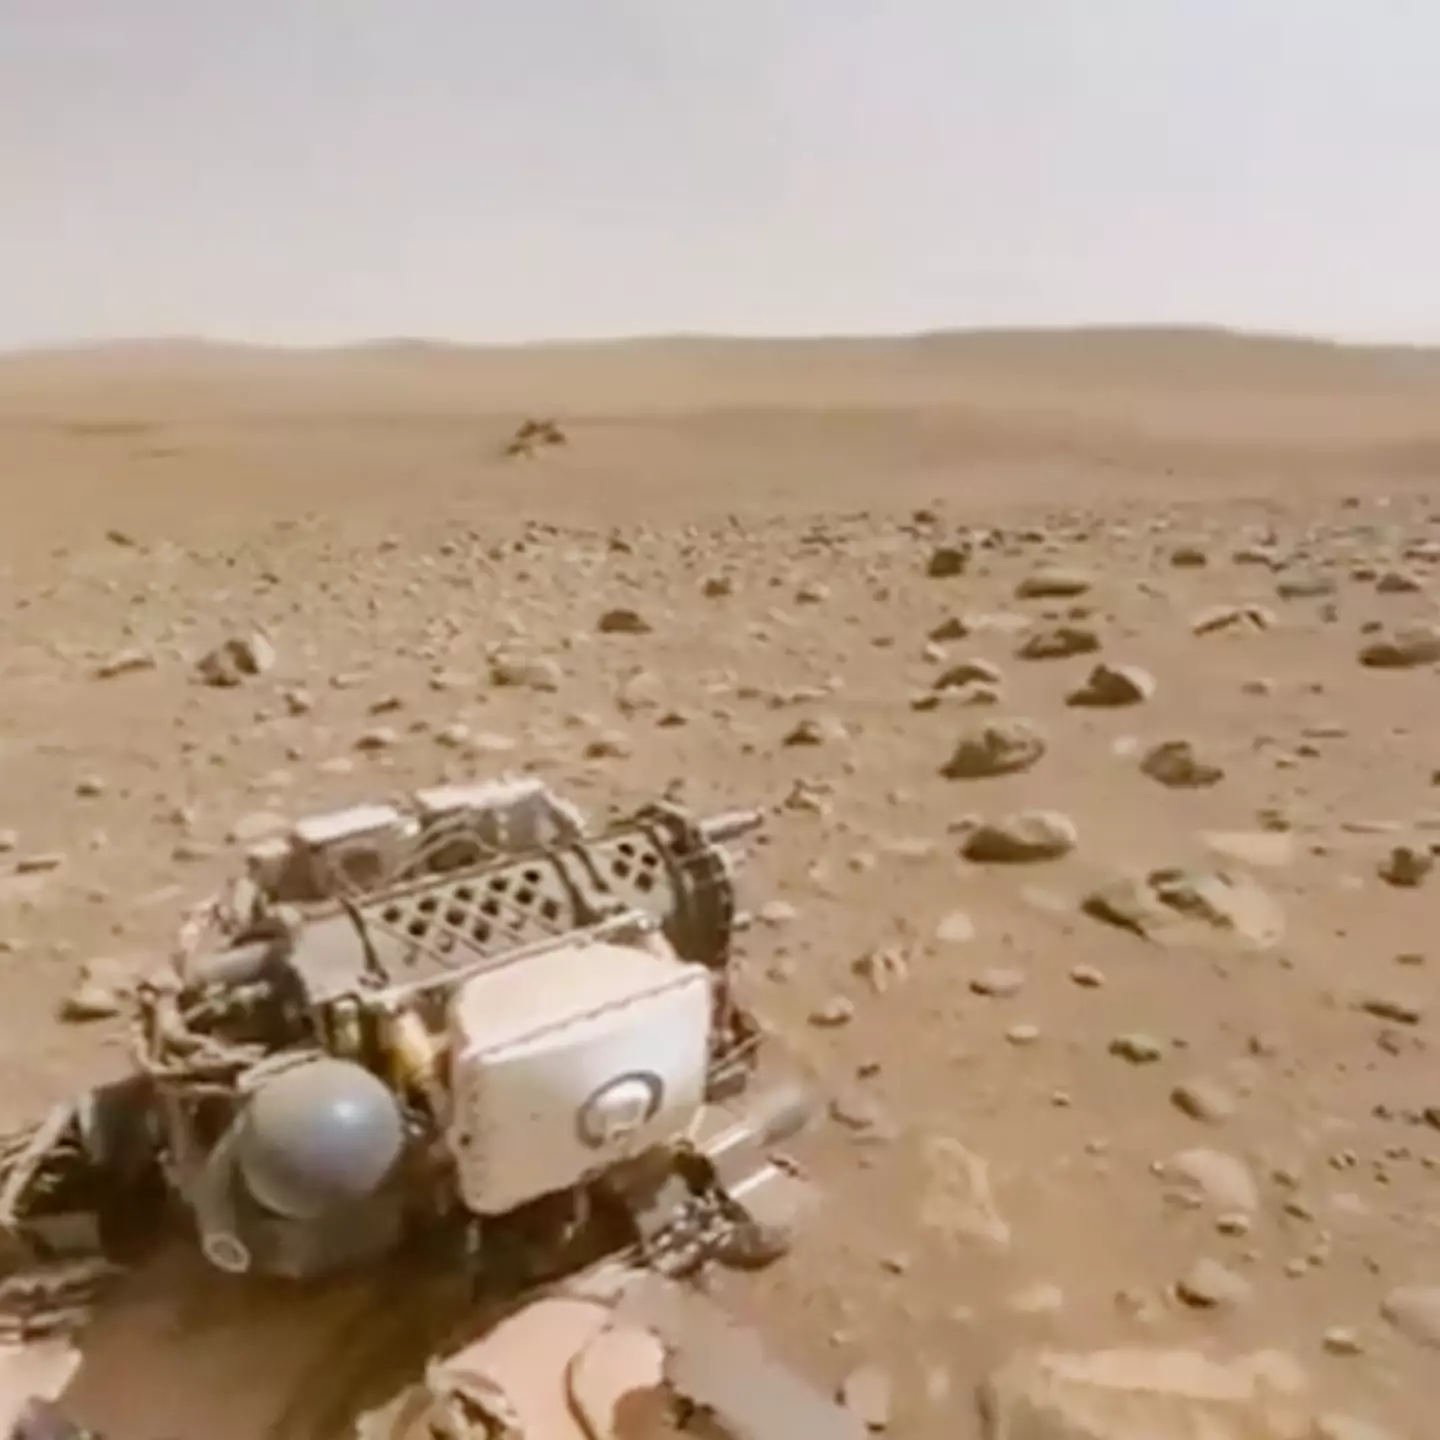 360° footage of Mars from Perseverance rover has everyone pointing out unlikely similarities to Earth